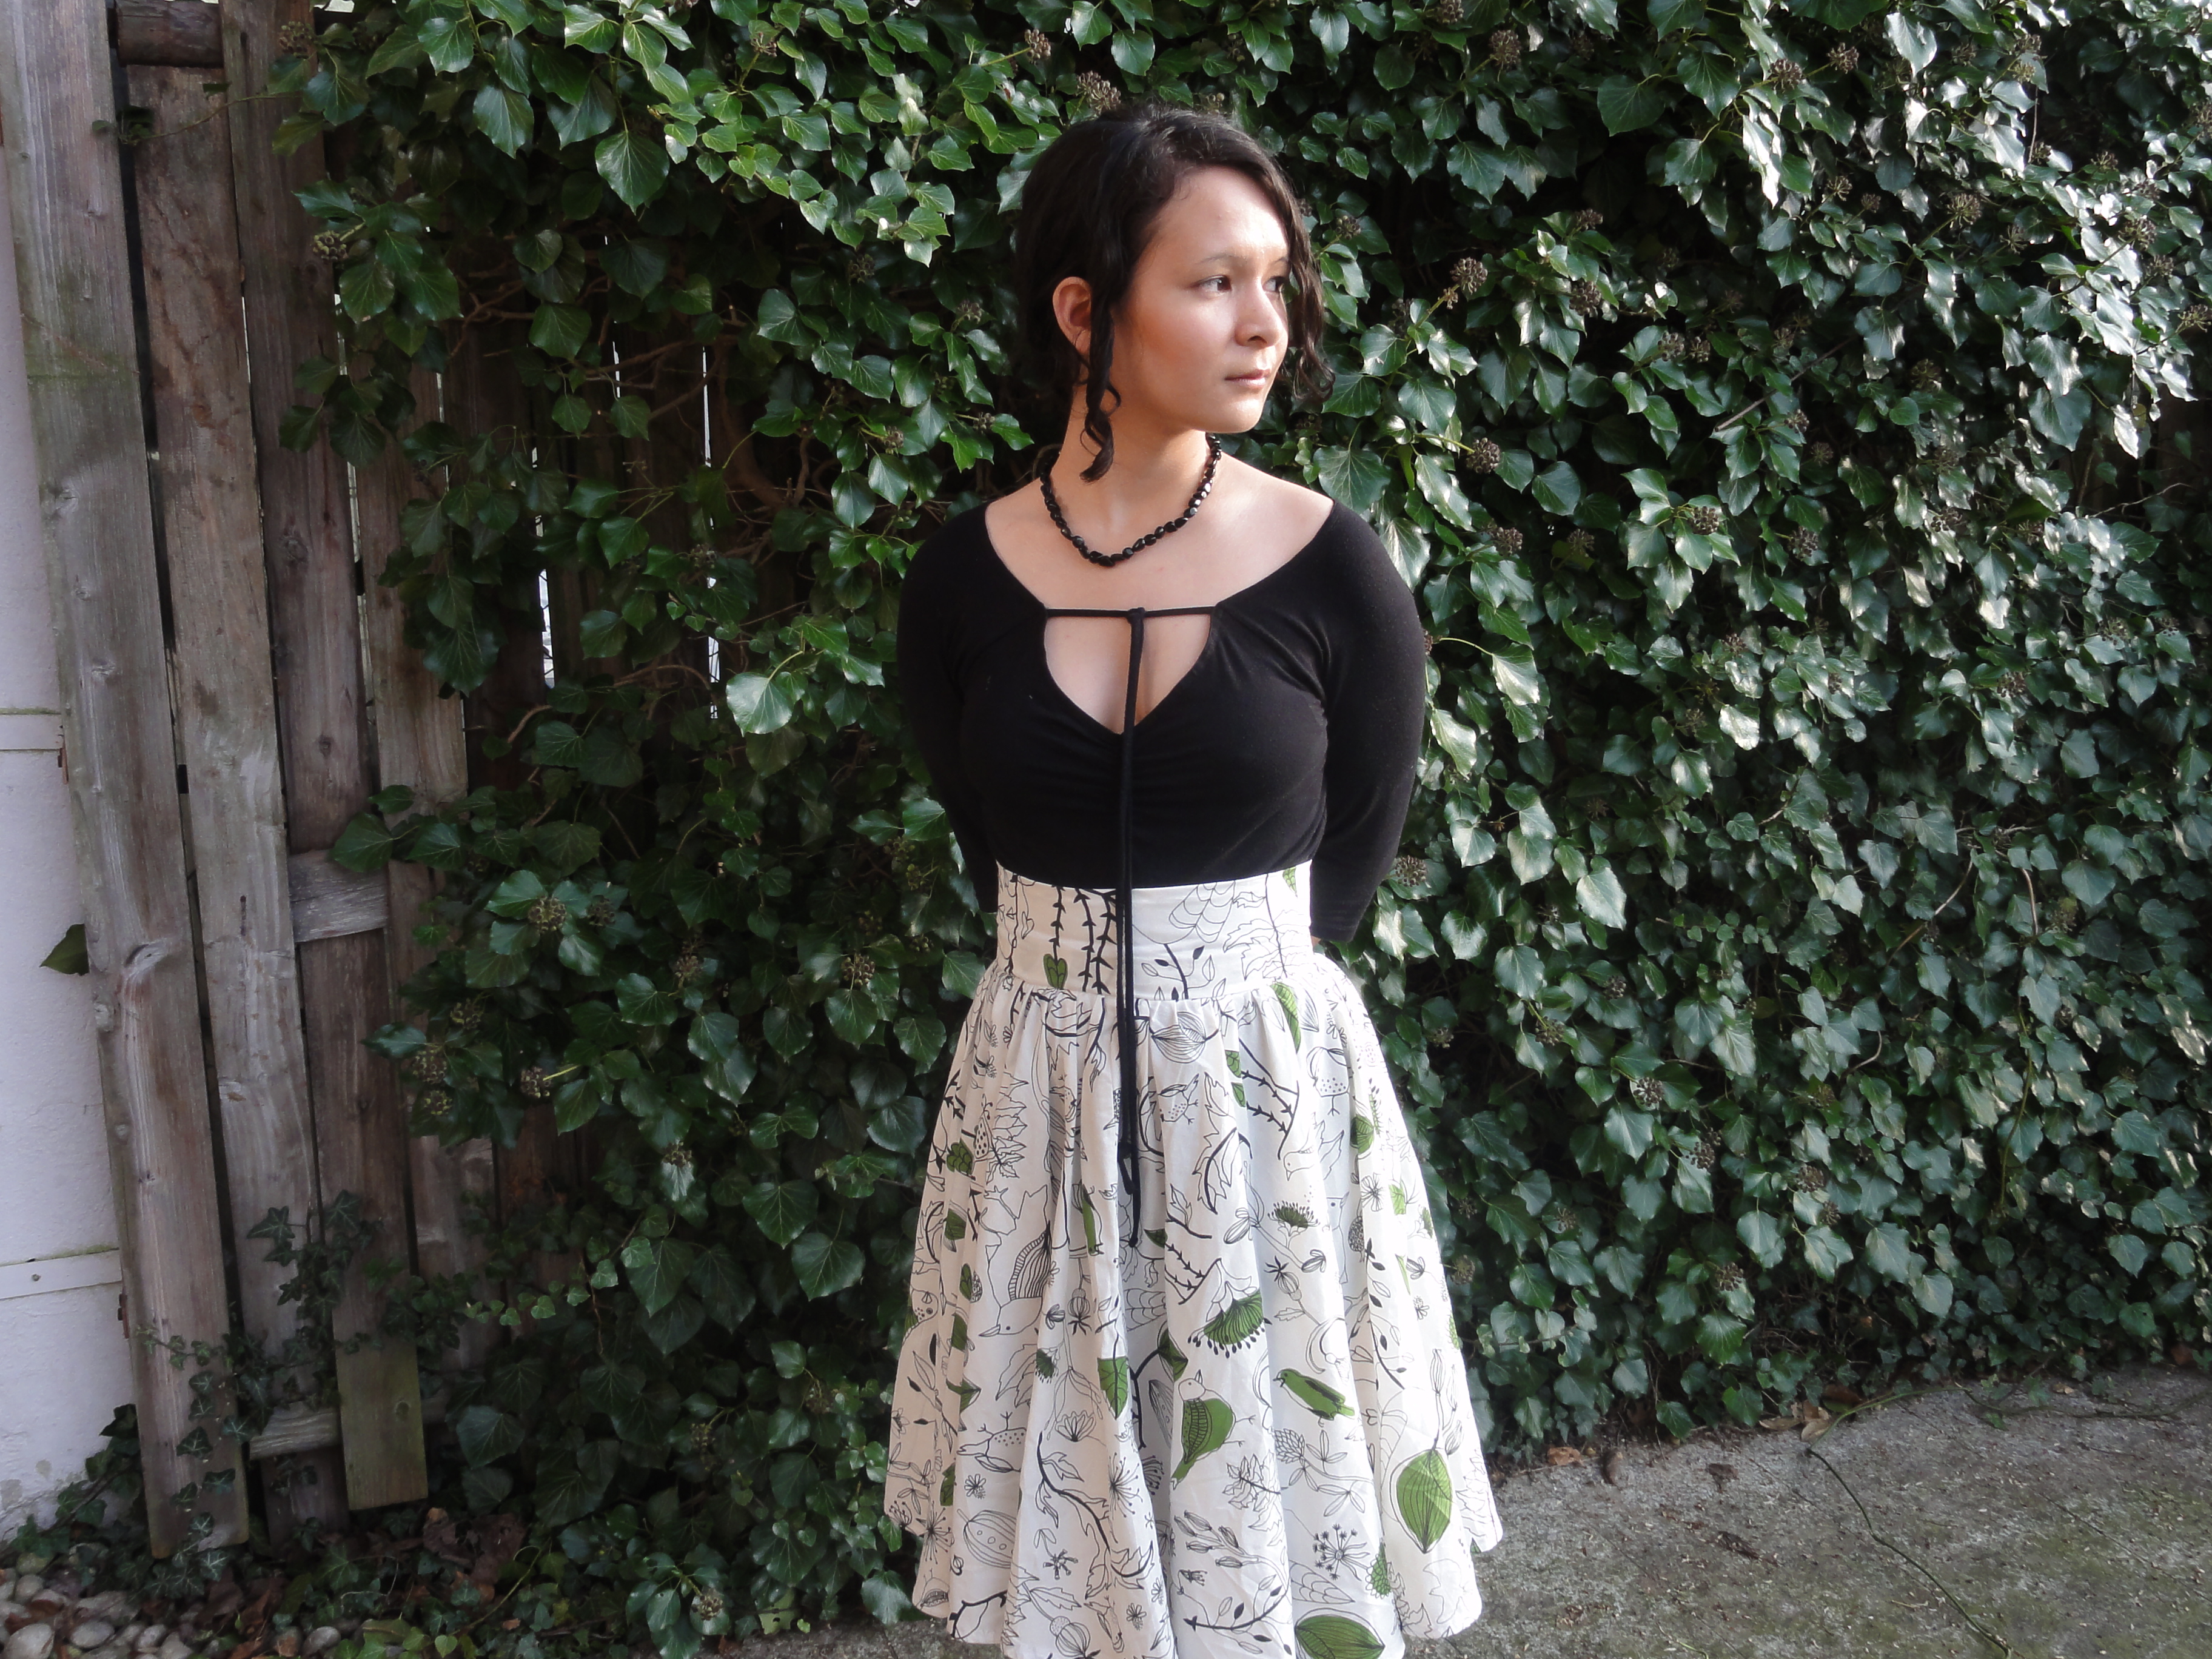 From the Archives: IKEA Skirt #1